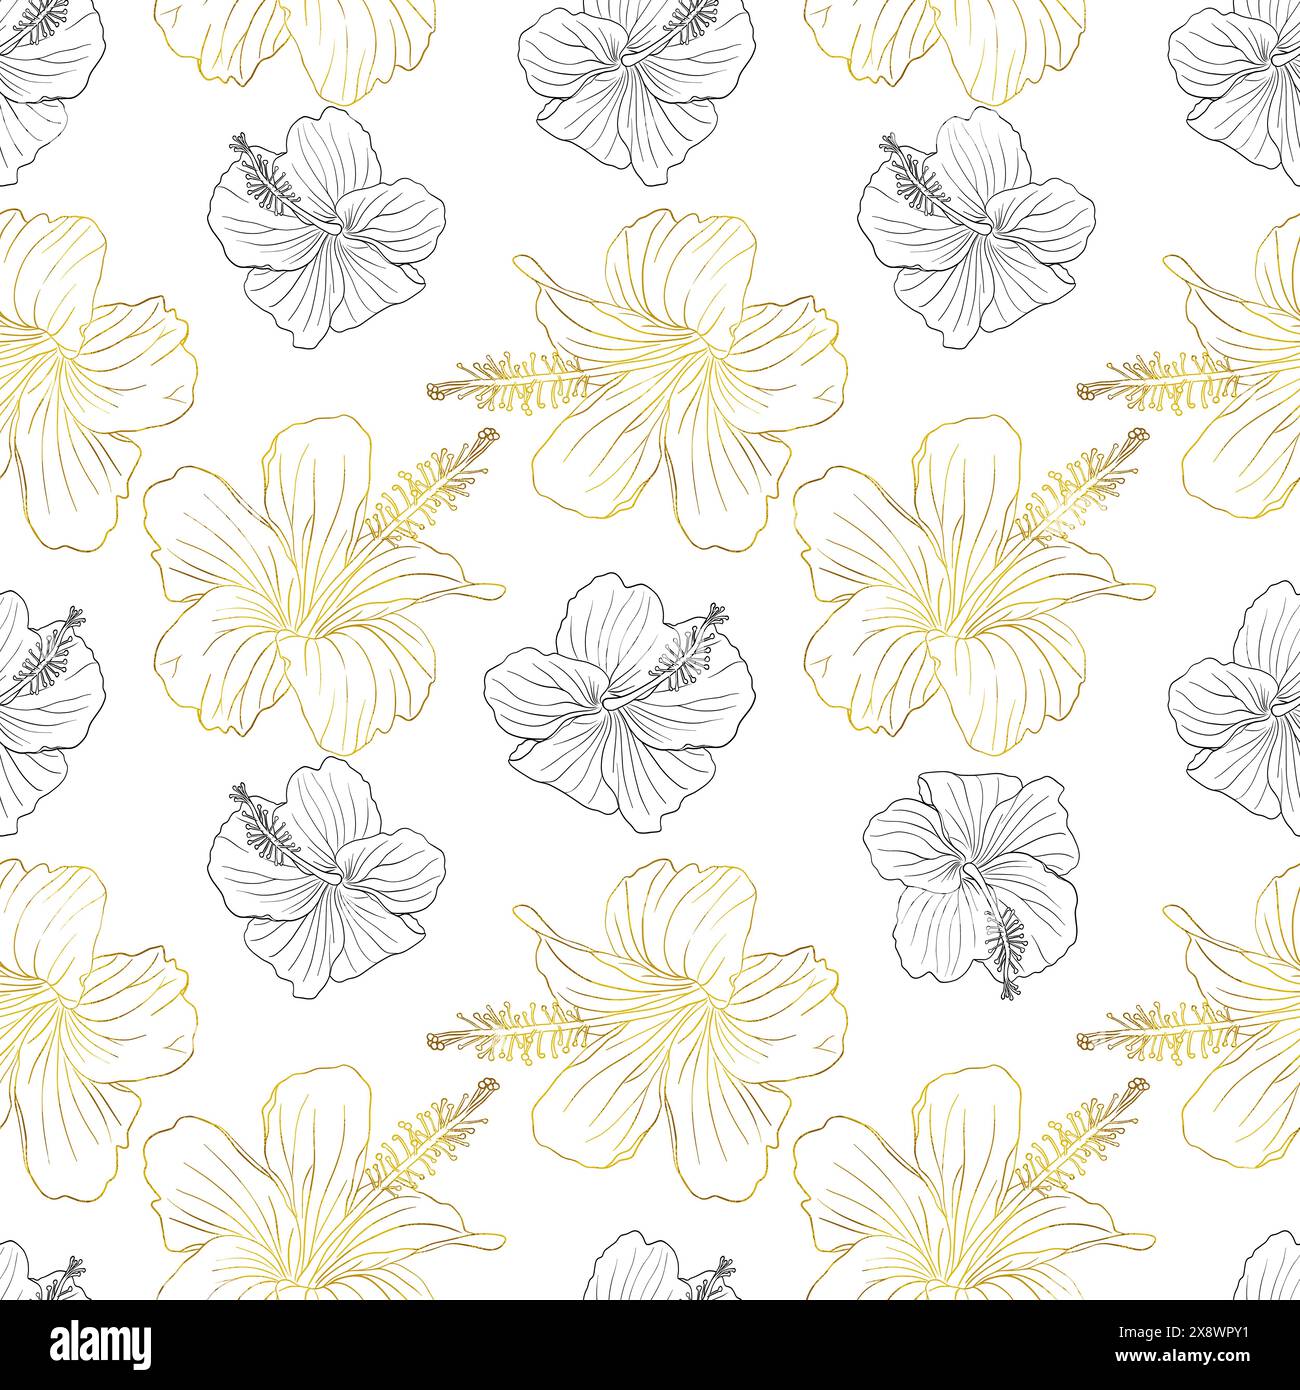 Hibiscus flower seamless pattern for textile design, scrapbook, wallpaper. Line art black and golden hand drawn tropical floral background Stock Vector